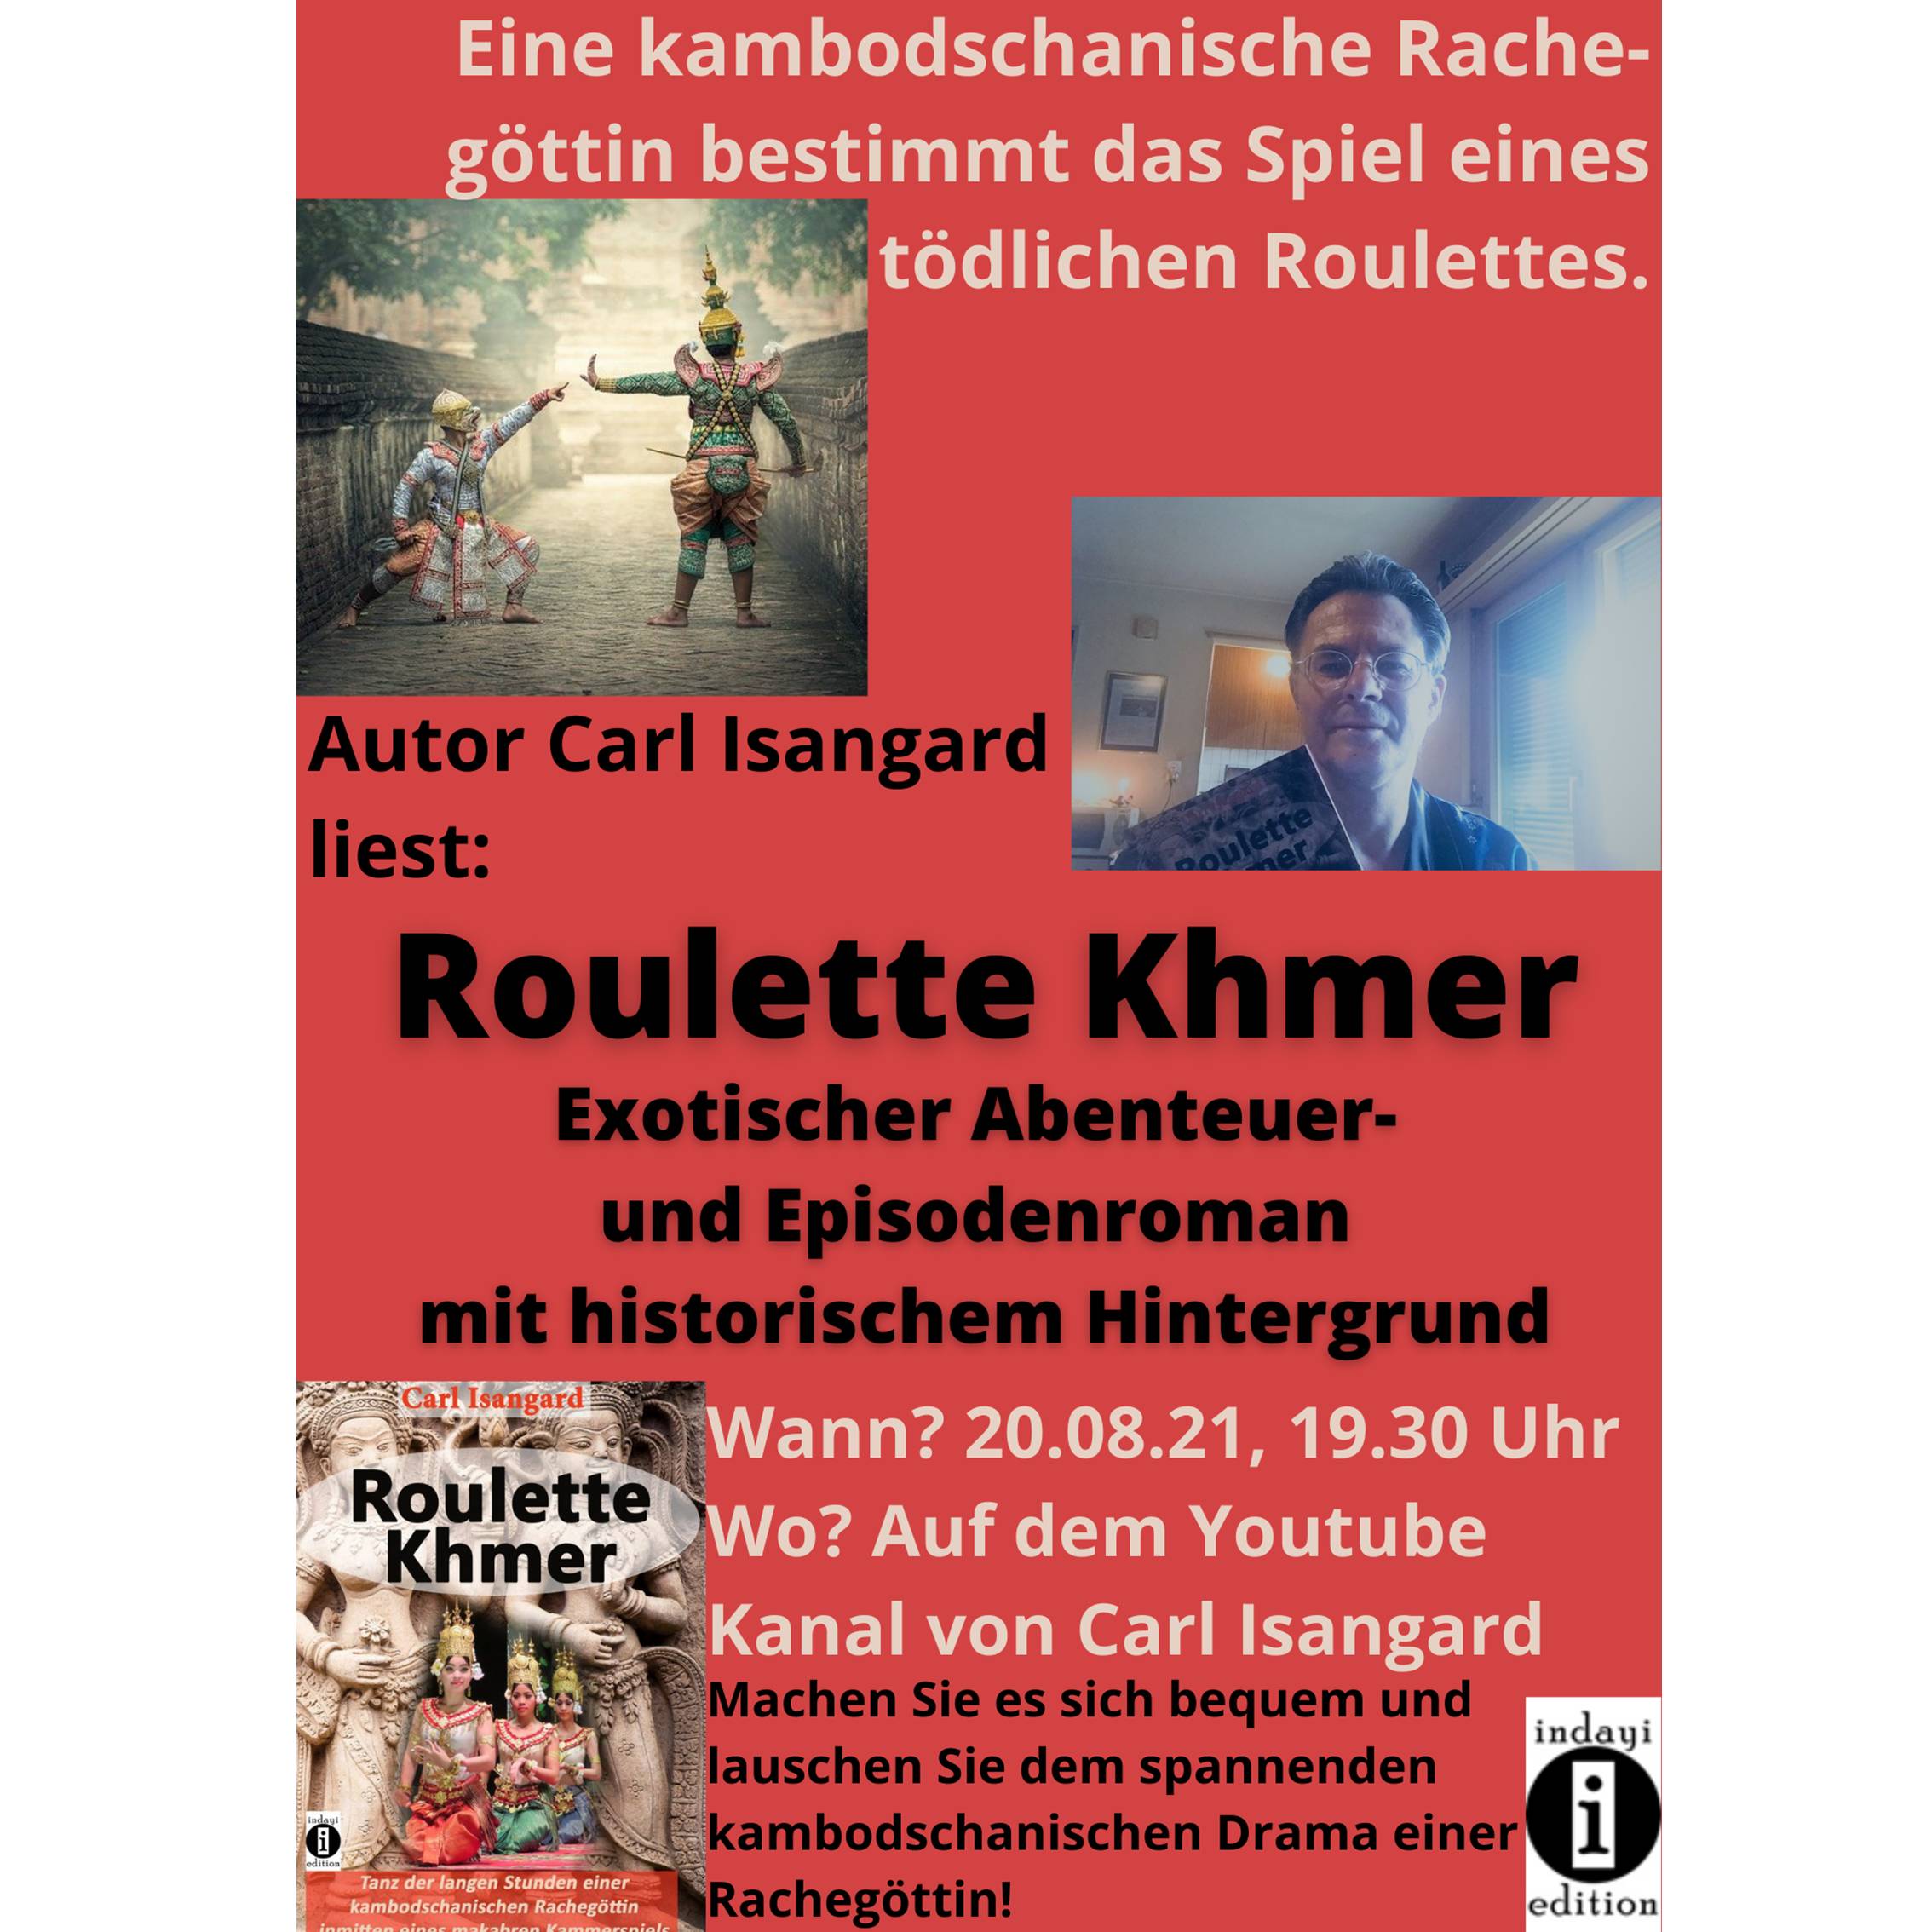 You are currently viewing Spannende Online-Lesung heute! Kambodschanisches historisches Rachedrama – Roulette Khmer